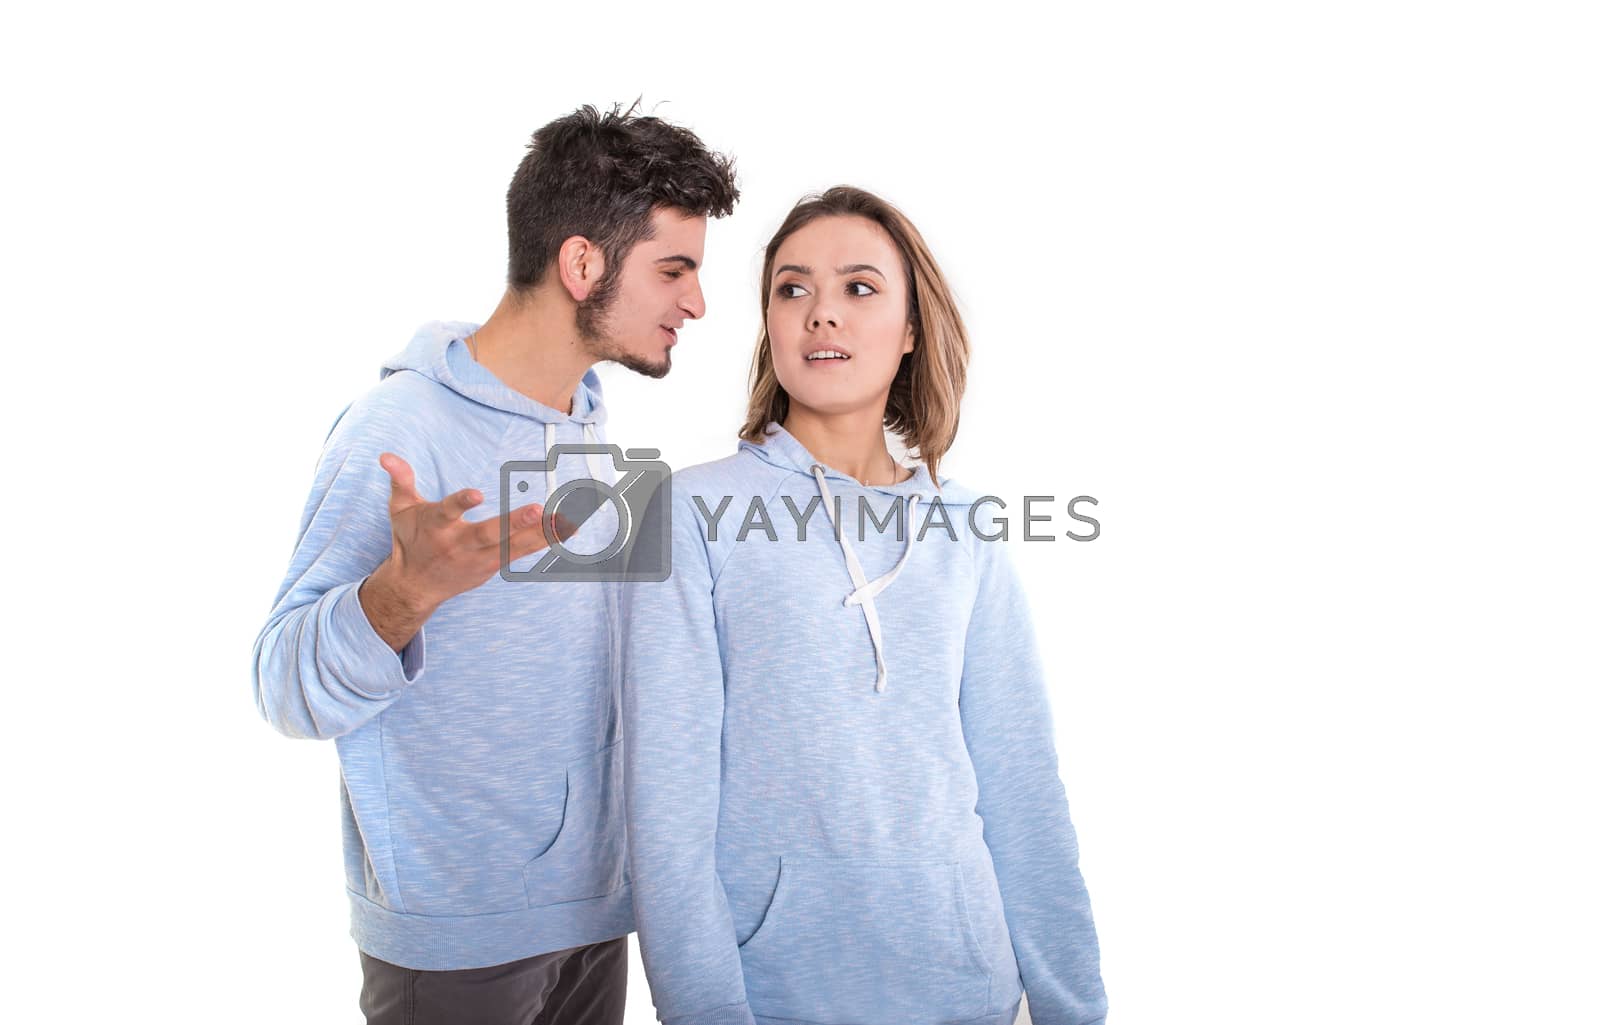 Royalty free image of Man shouting at woman, arguing couple isolated on white by Angel_a